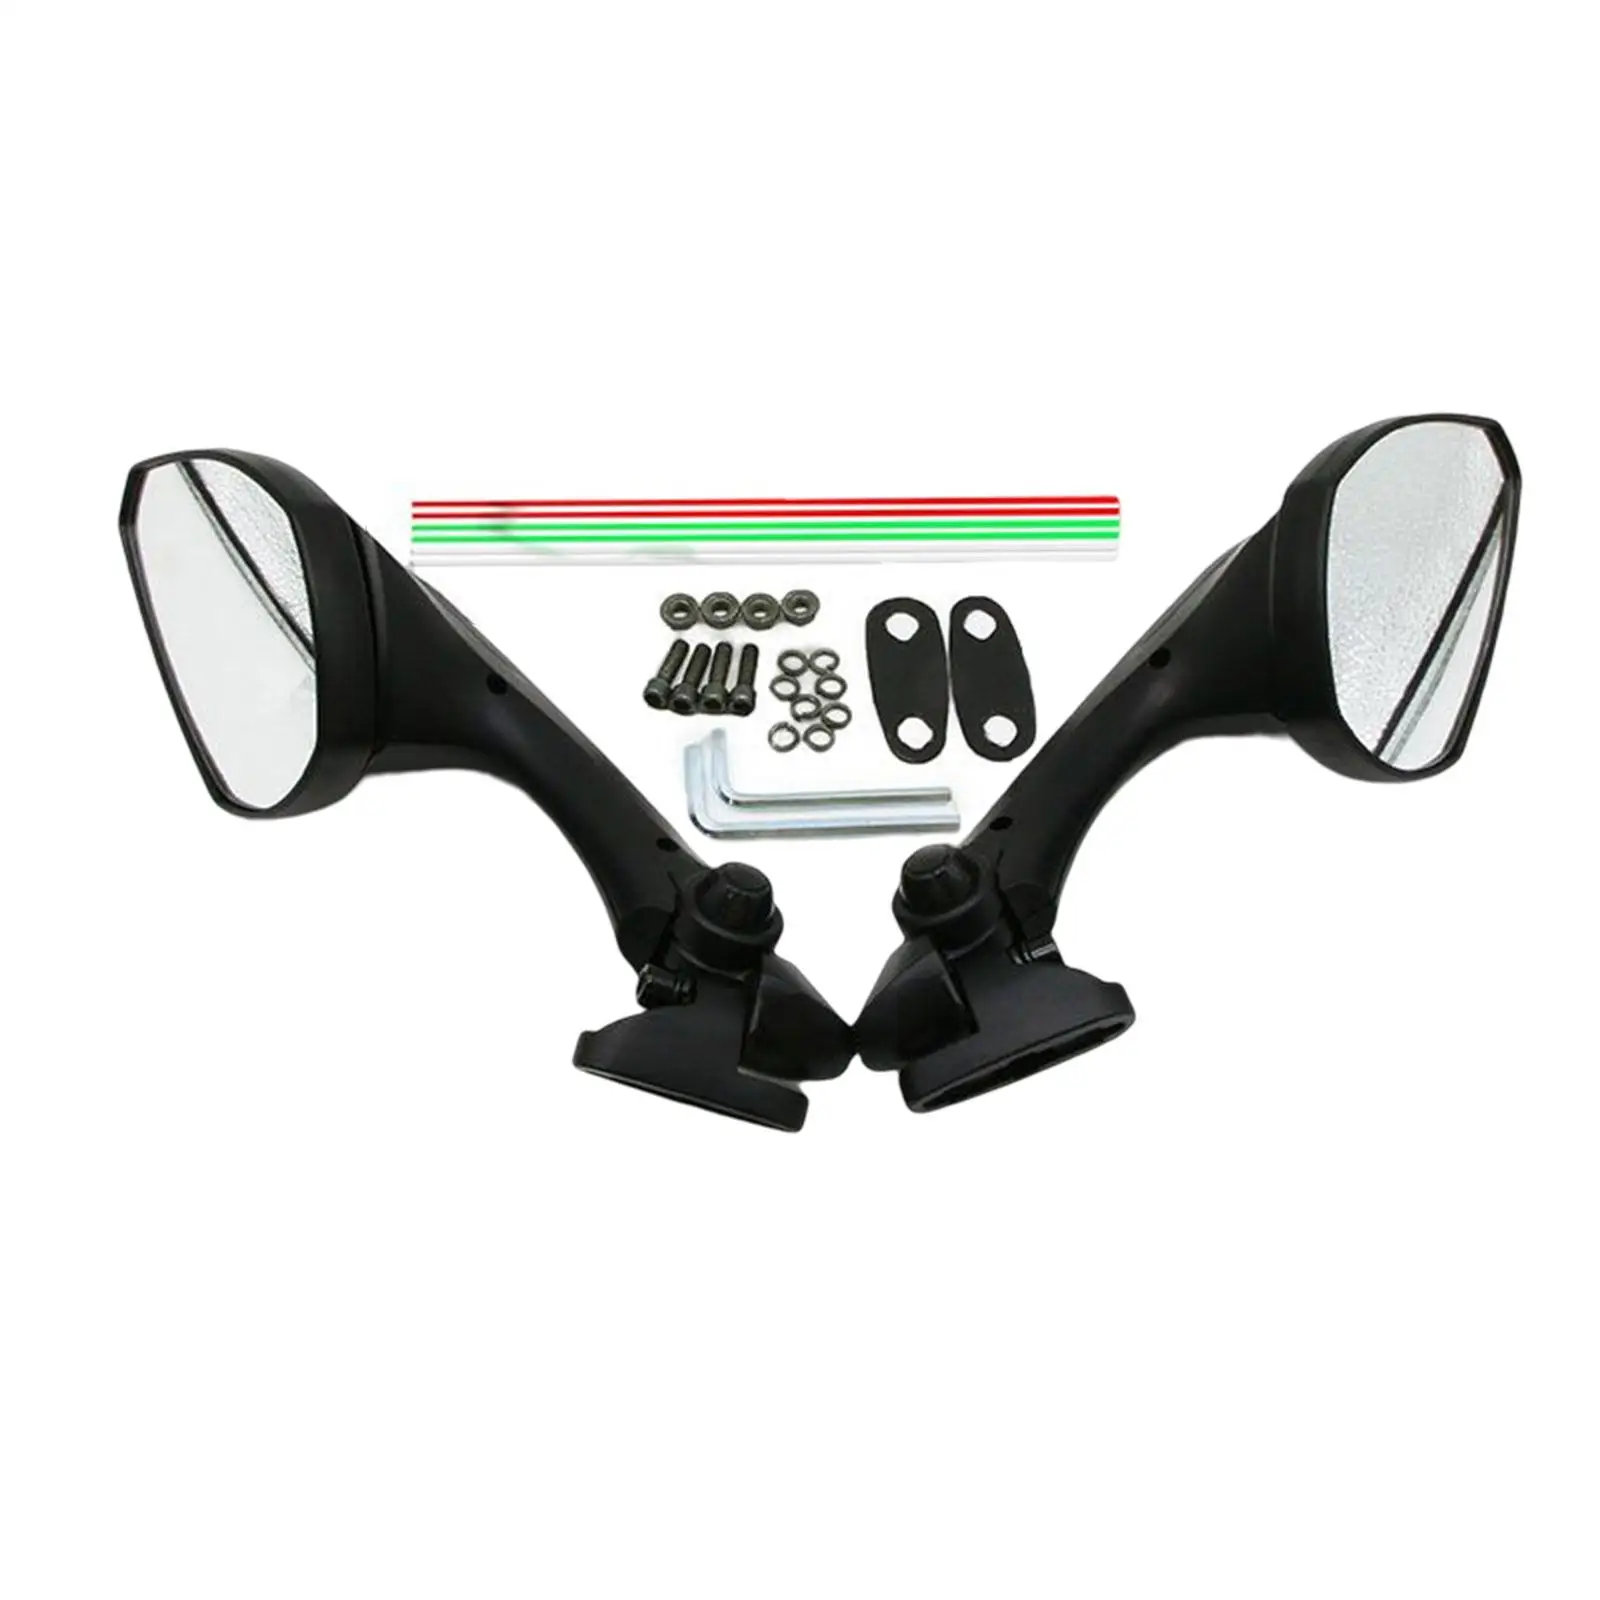 

2x Sturdy Handlebar Side View Mirror Modification Spare Parts Easy Installation Replaces Accessories Motorcycle Rearview Mirrors